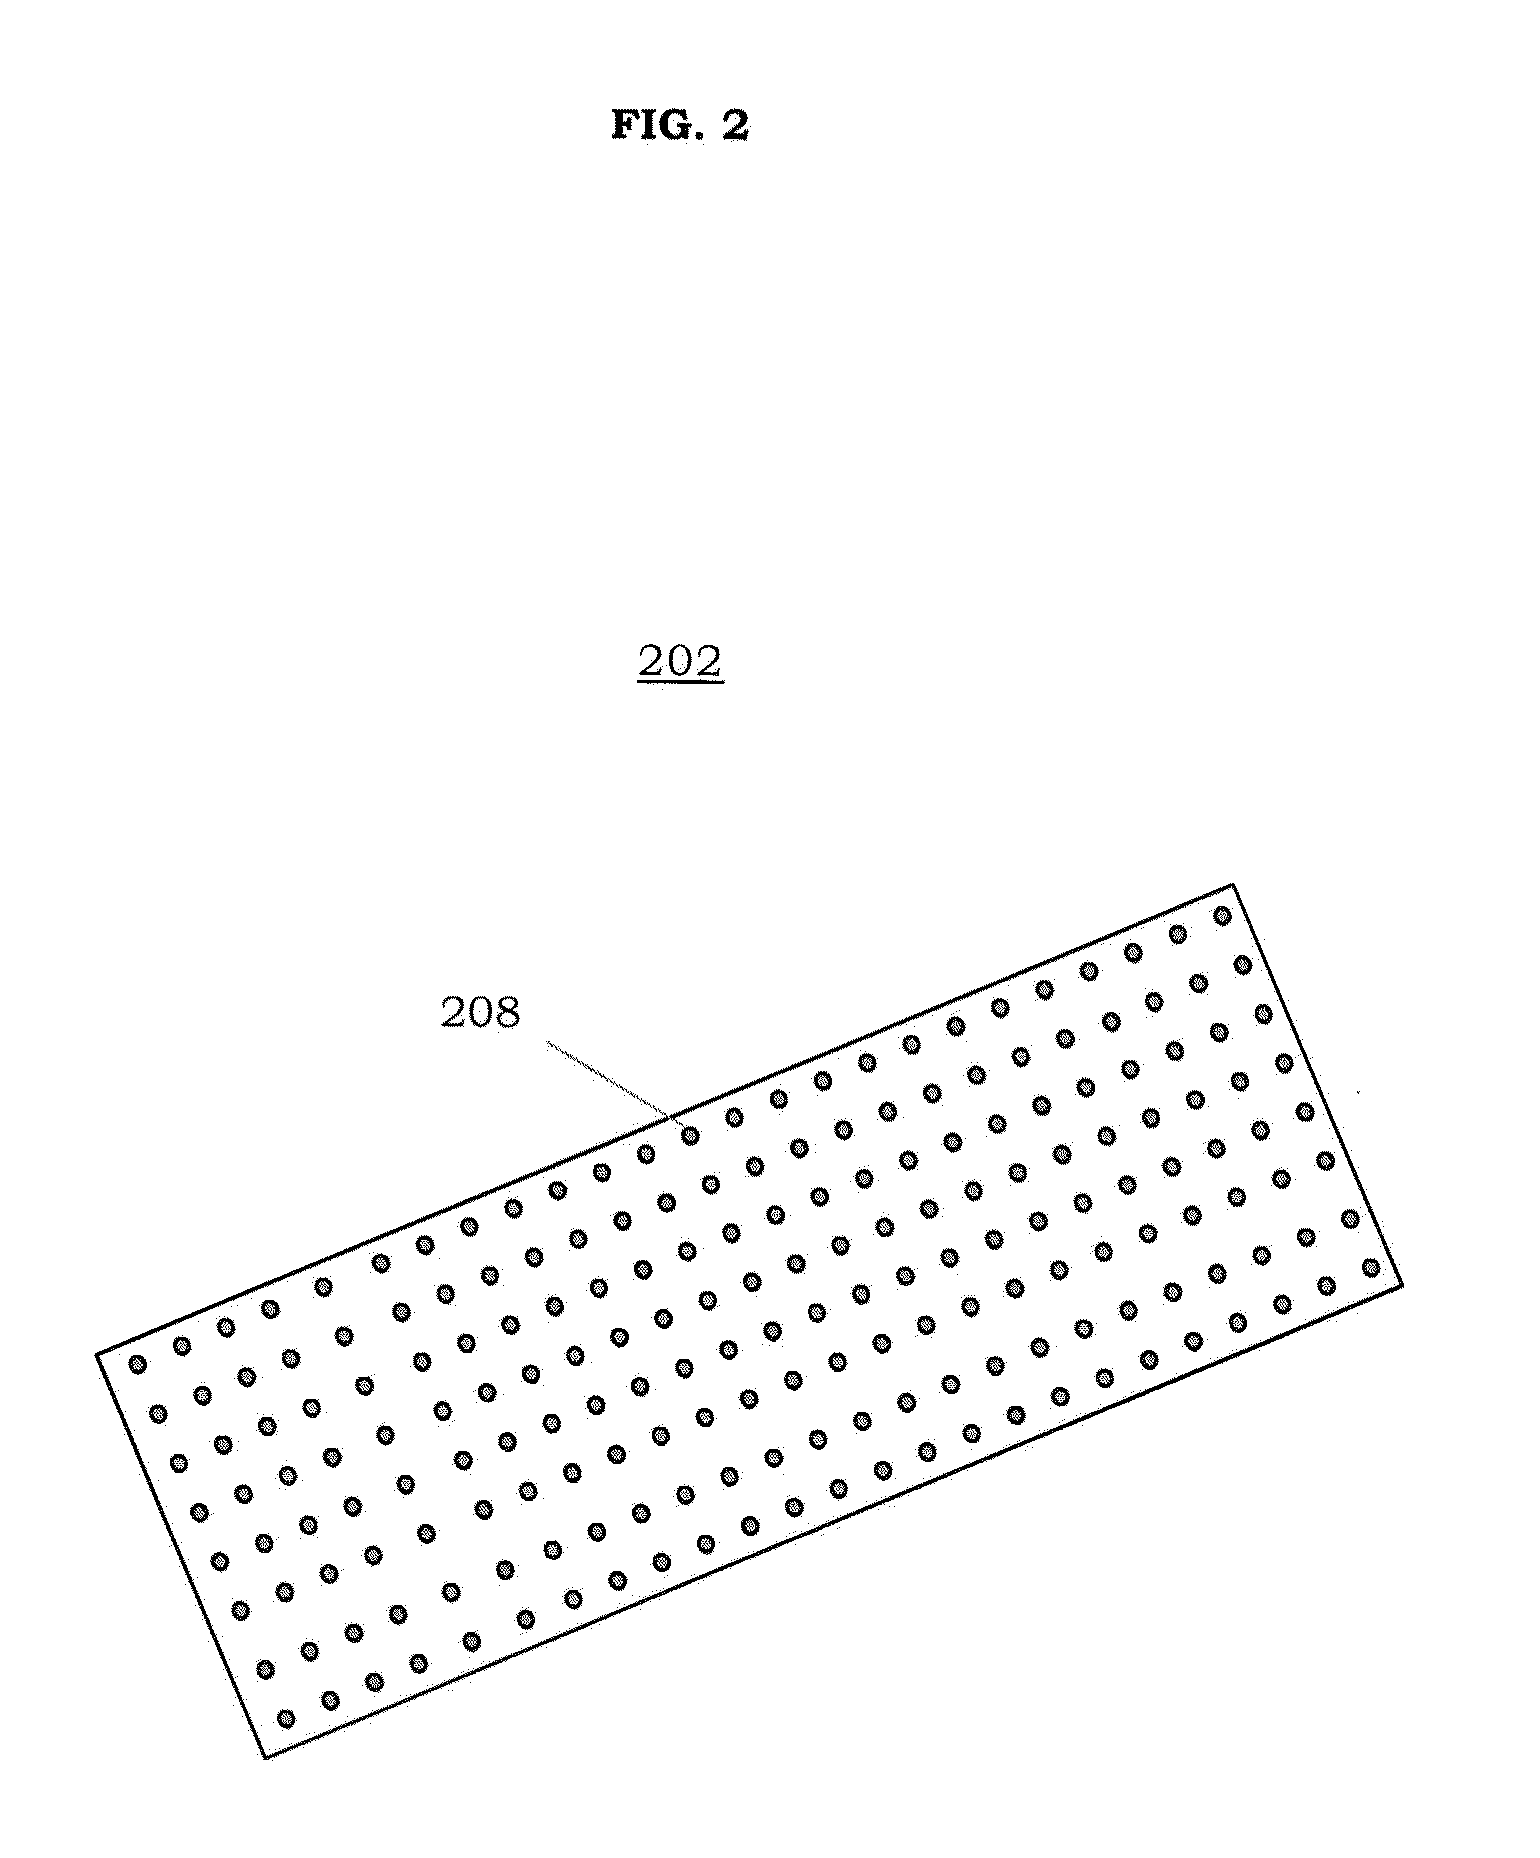 Acoustic metamaterial architectured composite layers, methods of manufacturing the same, and methods for noise control using the same